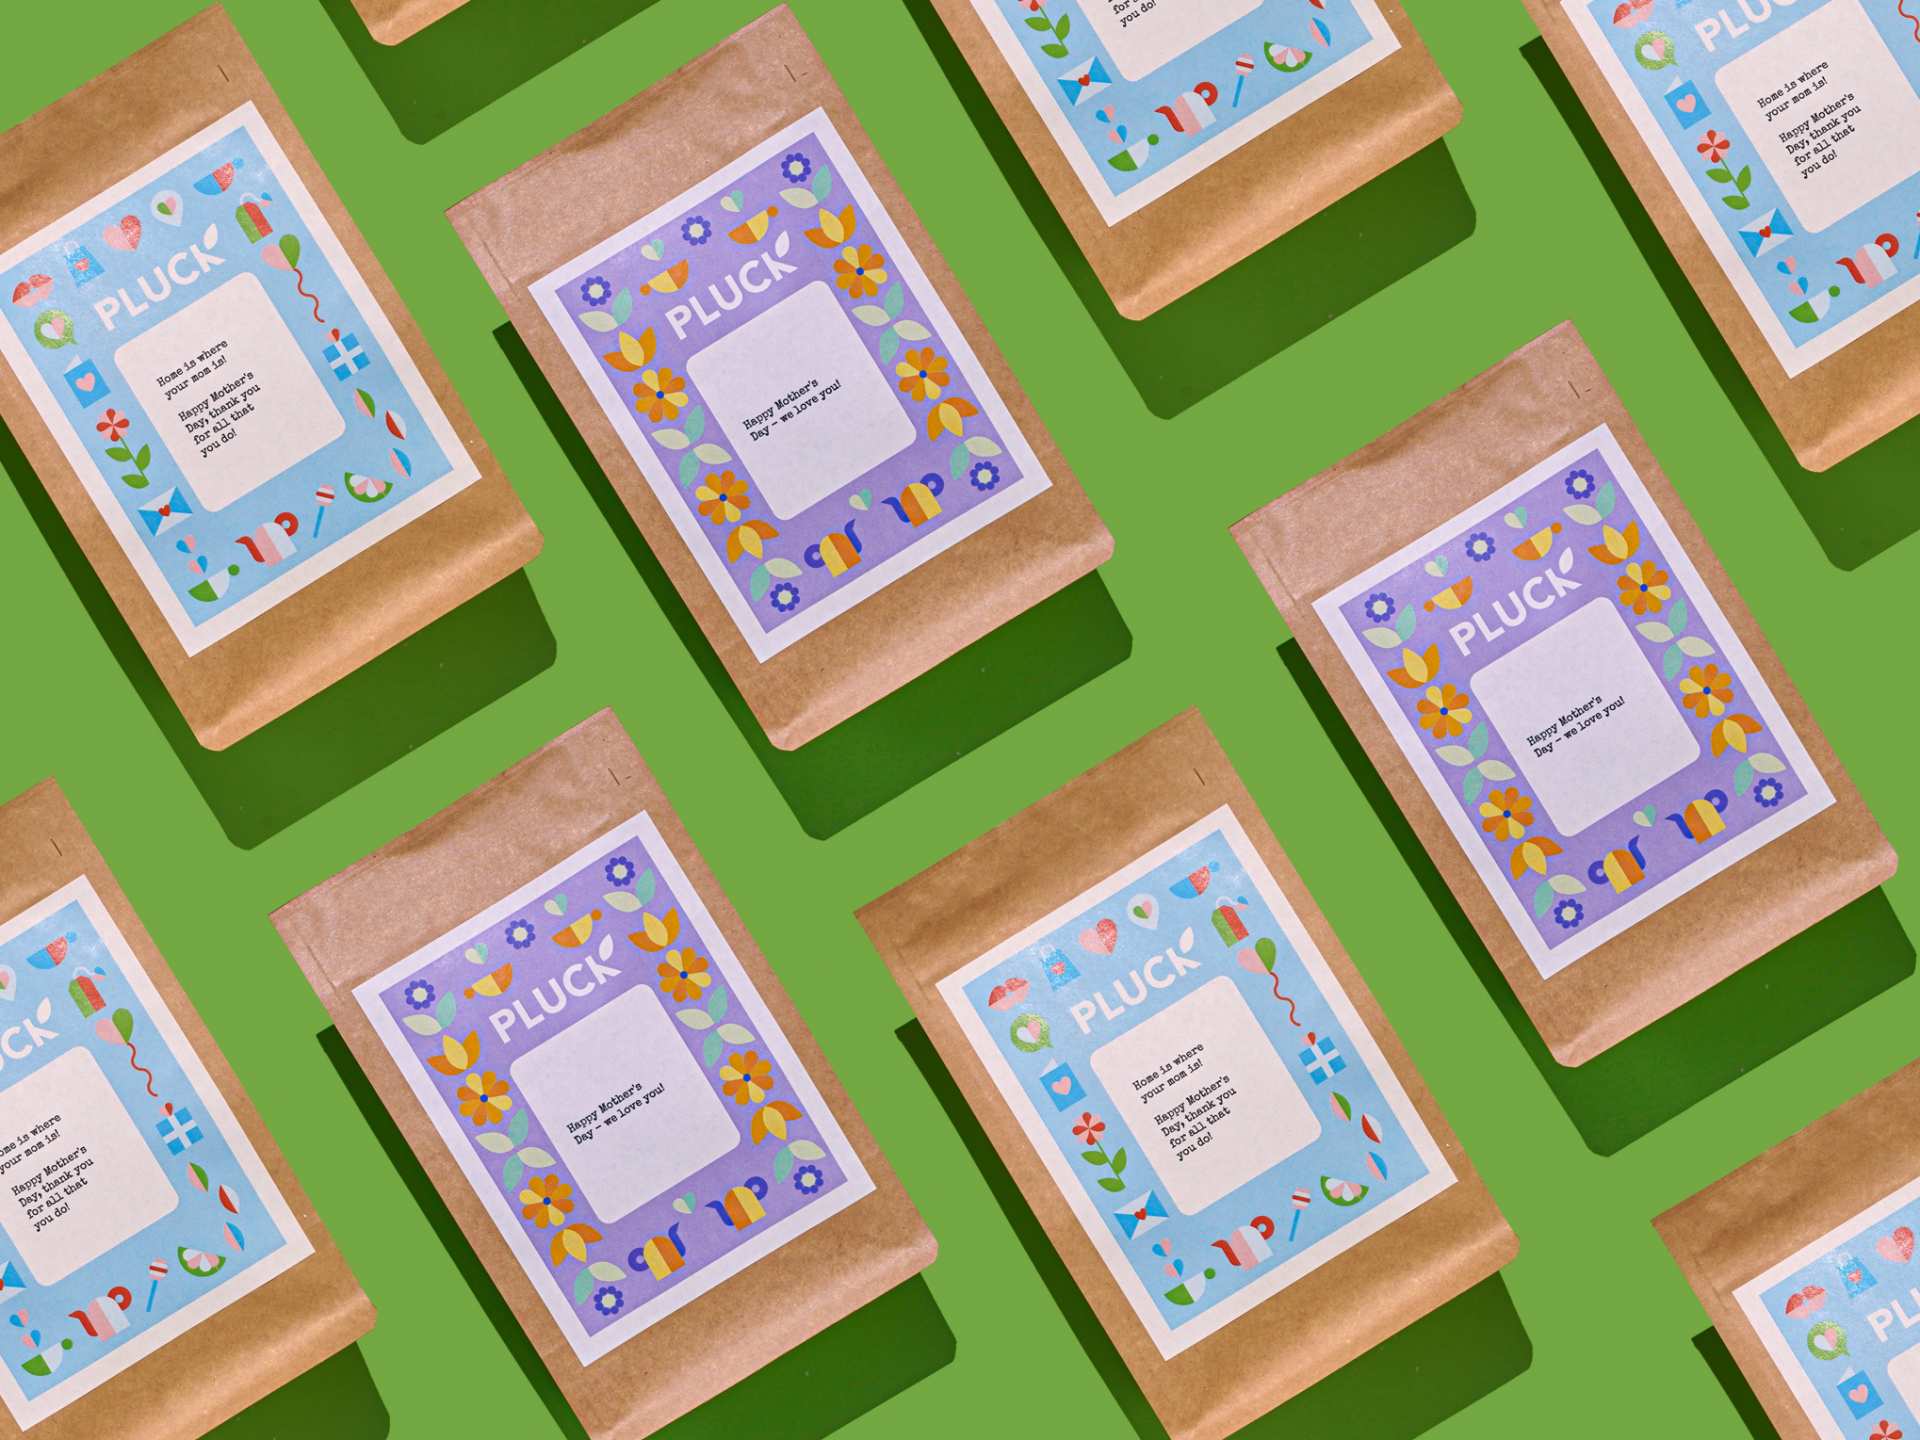 Mother's Day ideas | Pluck teas laid out in a pattern